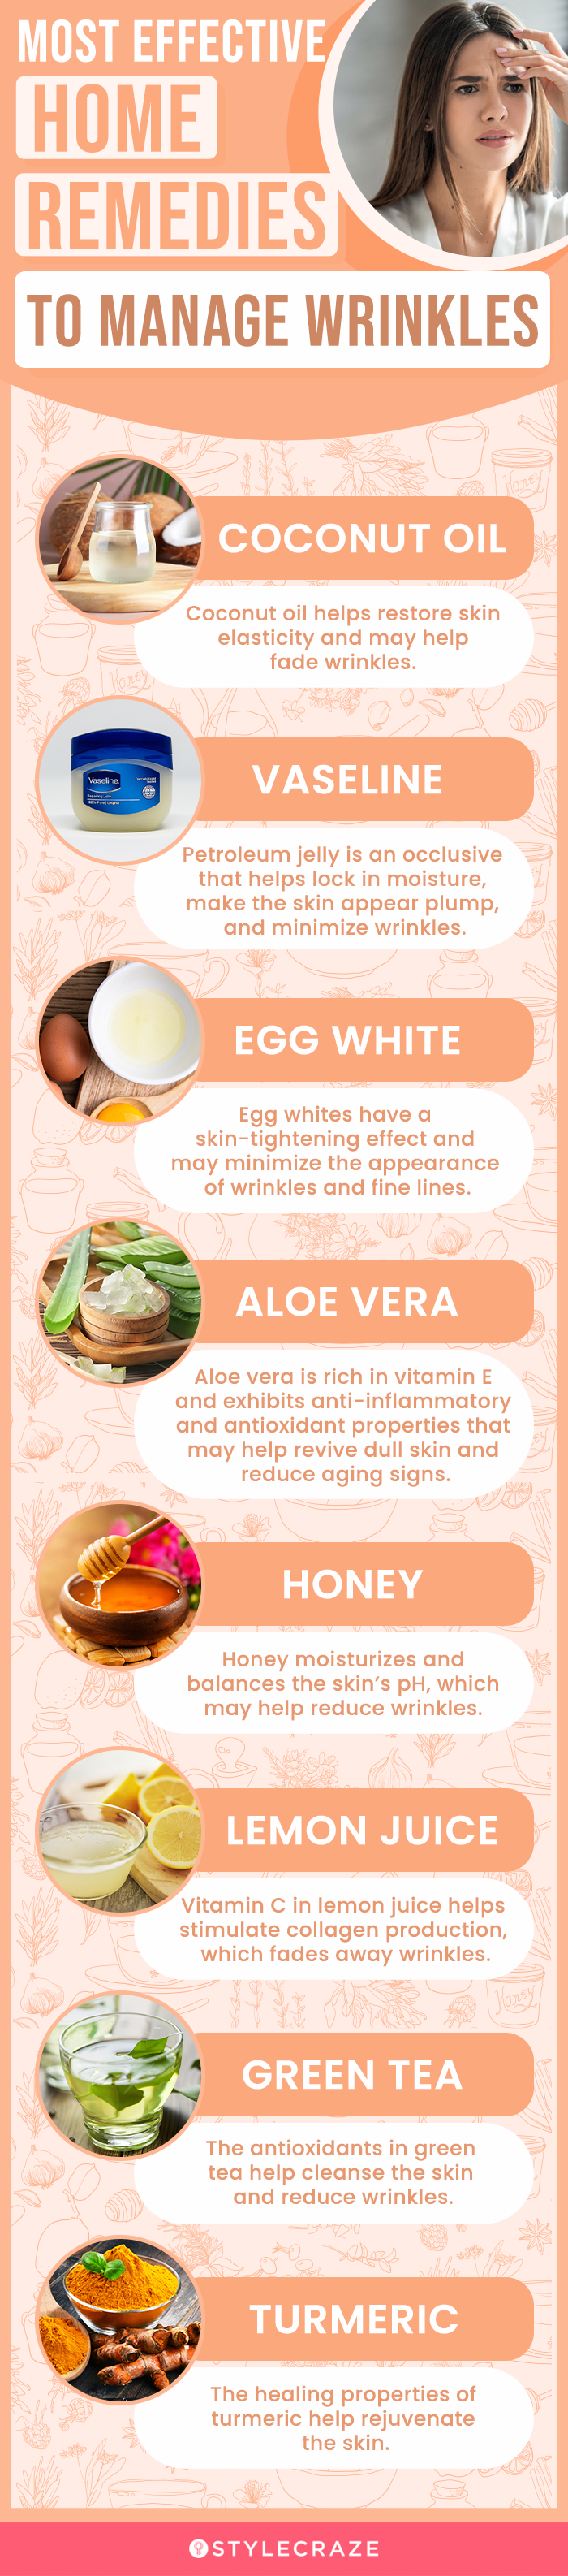 most effective home remedies to manage wrinkles (infographic)